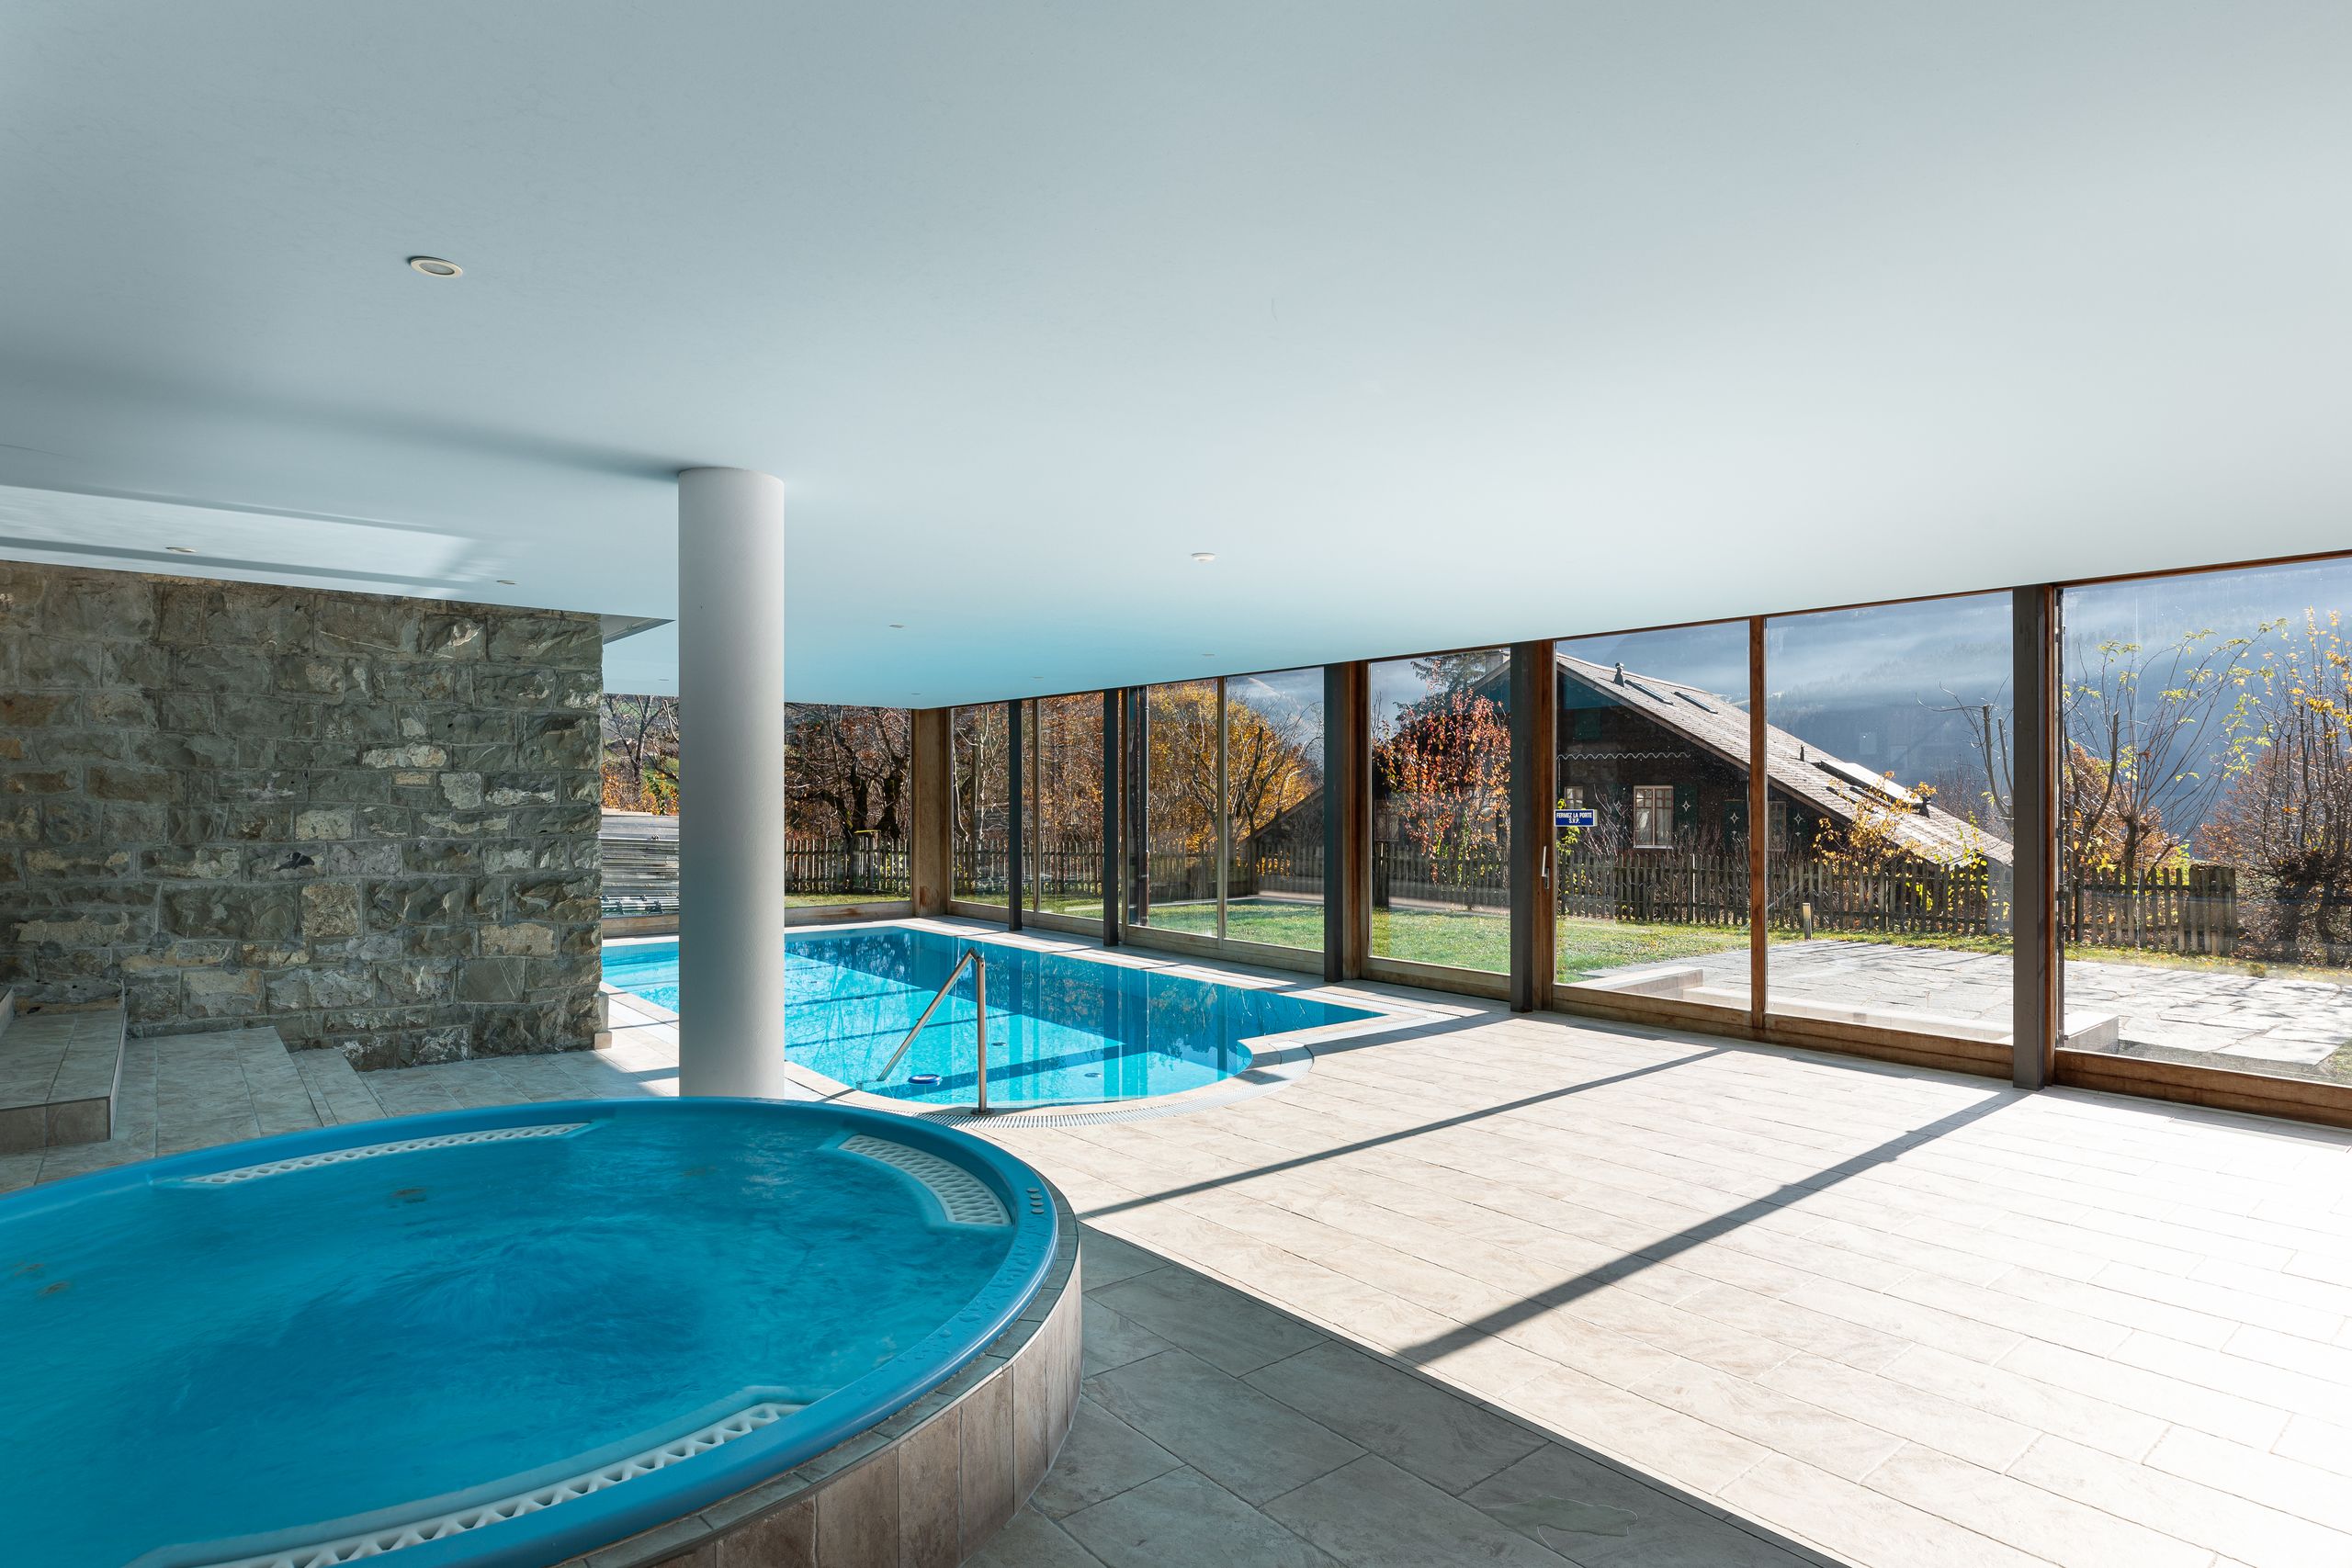 Common areas : Indoor swimming pool and jacuzzi